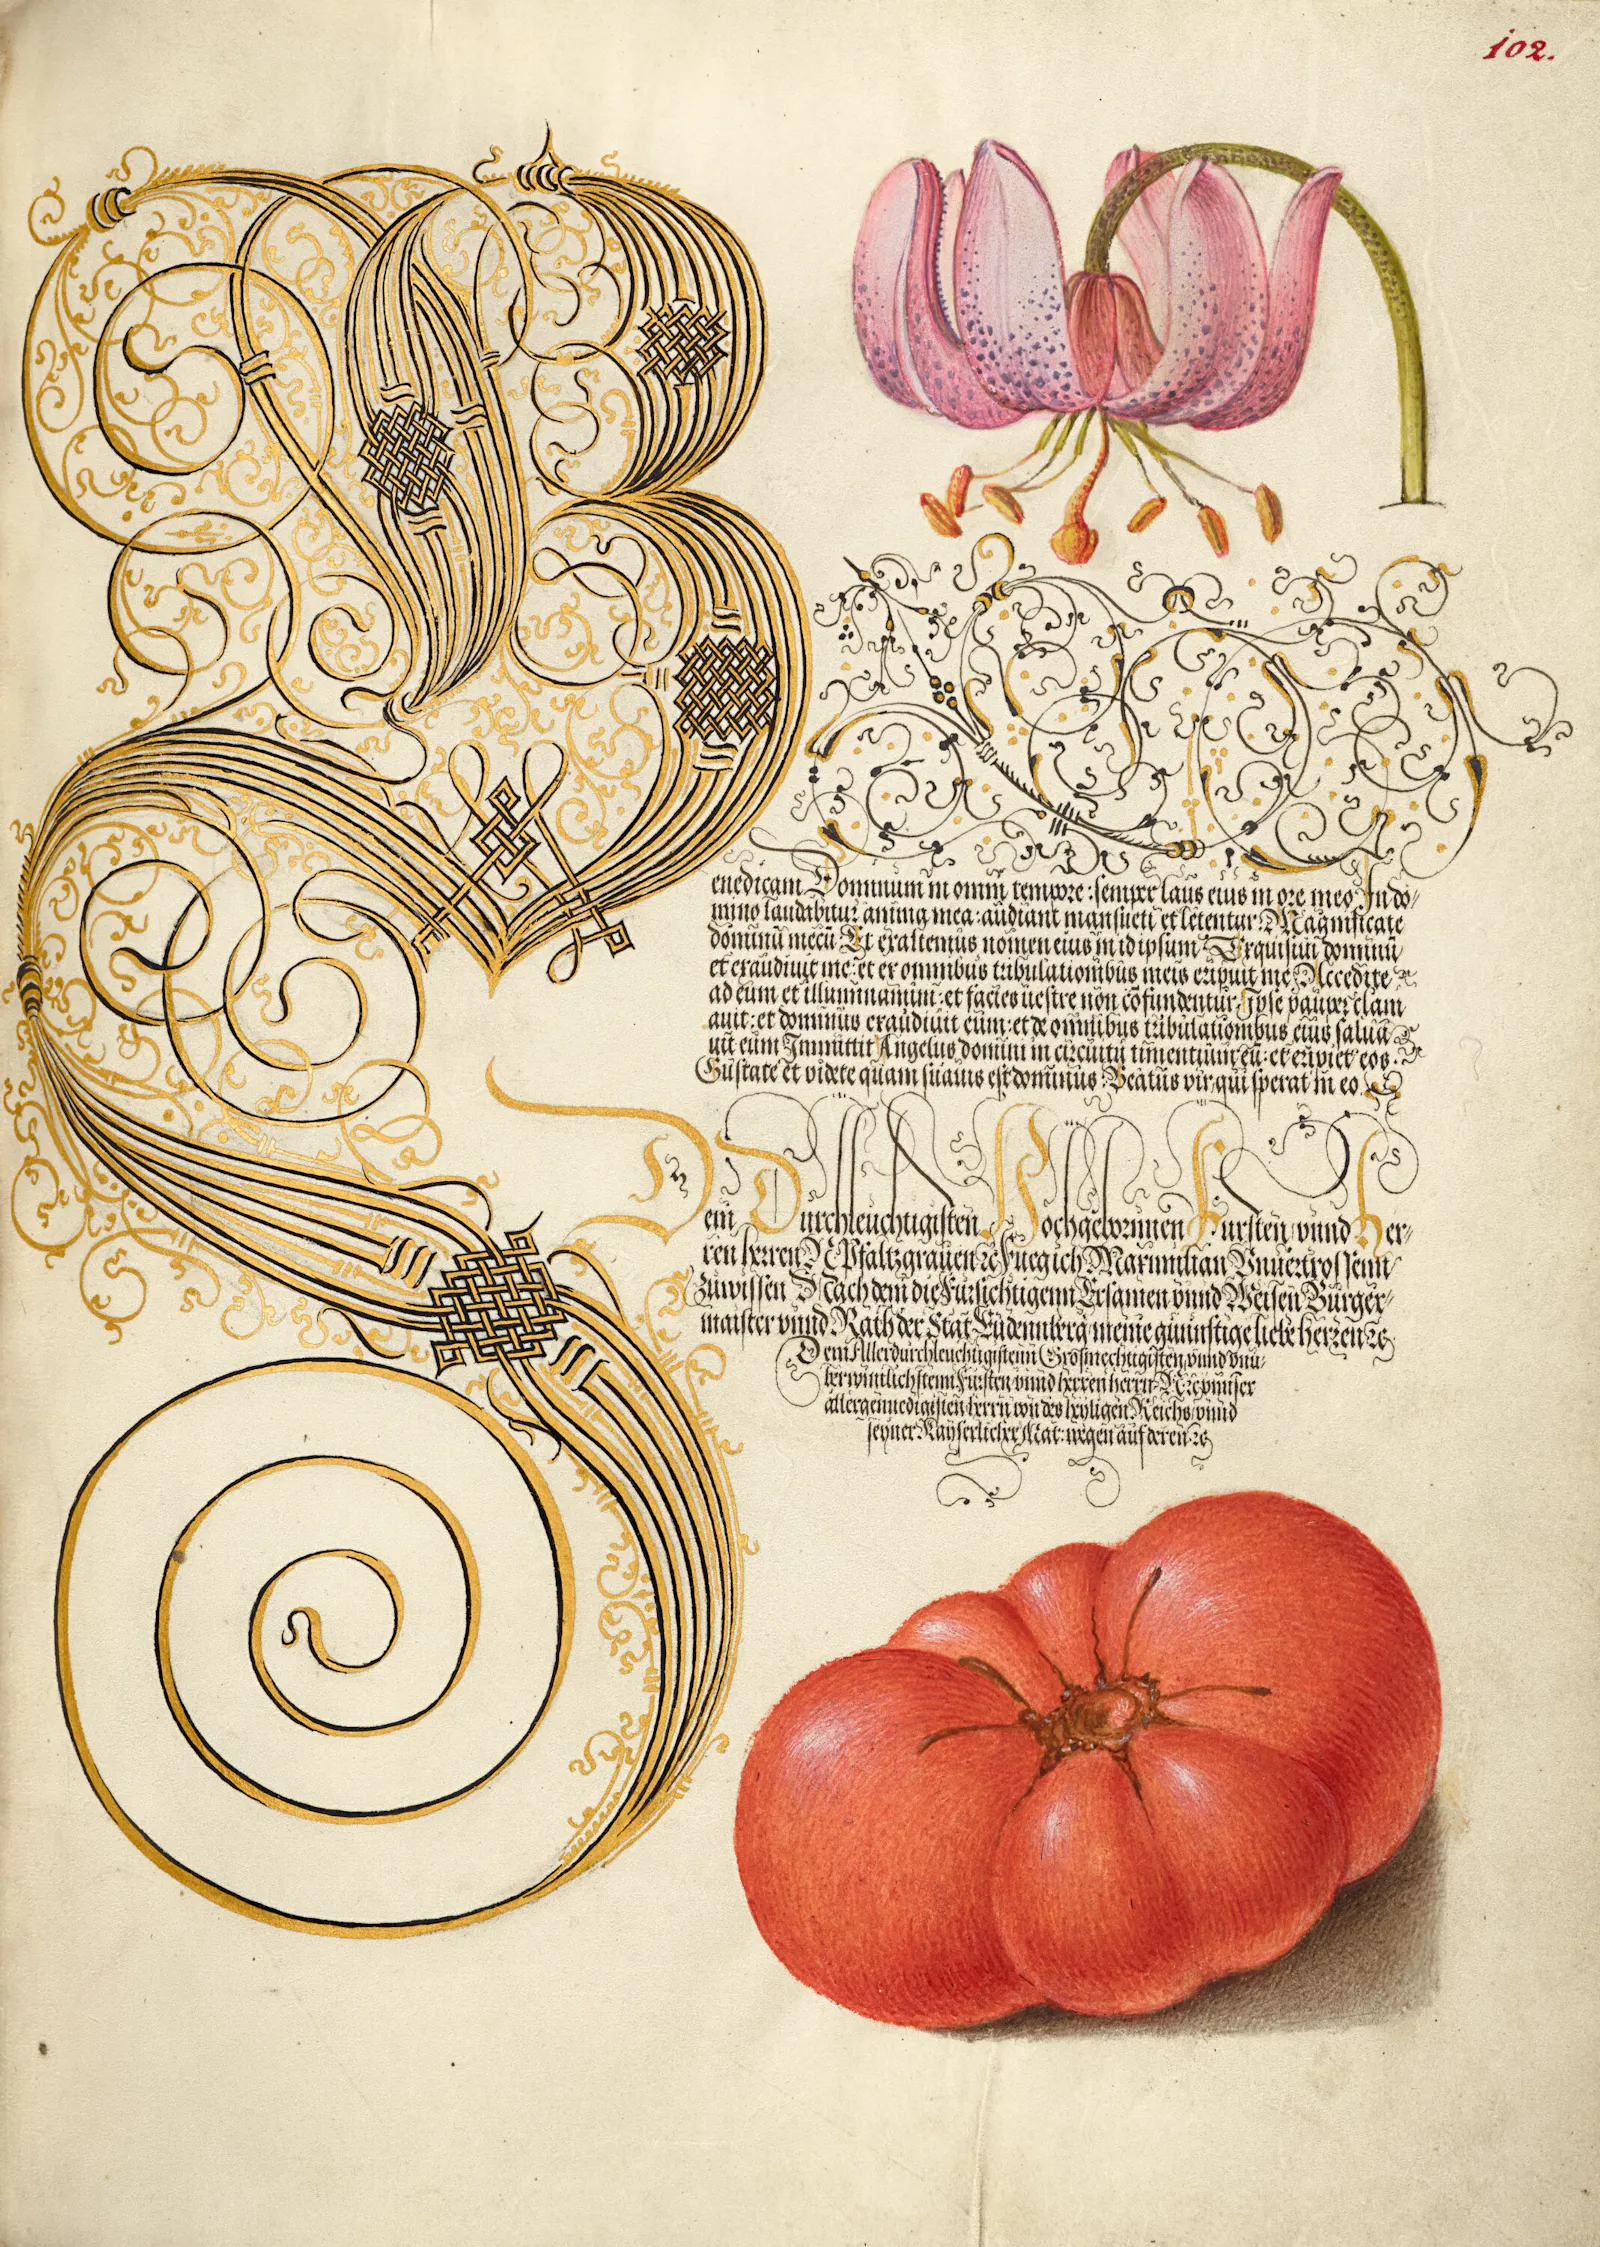 Joris Hoefnagel (Flemish, / Hungarian, 1542 - 1600), illuminator and Georg Bocskay (Hungarian, died 1575), scribe
Martagon Lily and Tomato, 1561–1562; illumination added 1591–1596
Watercolors, gold and silver paint, and ink
Leaf: 16.6 × 12.4 cm (6 9/16 × 4 7/8 in.)
The J. Paul Getty Museum, Los Angeles, Ms. 20, fol. 102, 86.MV.527.102